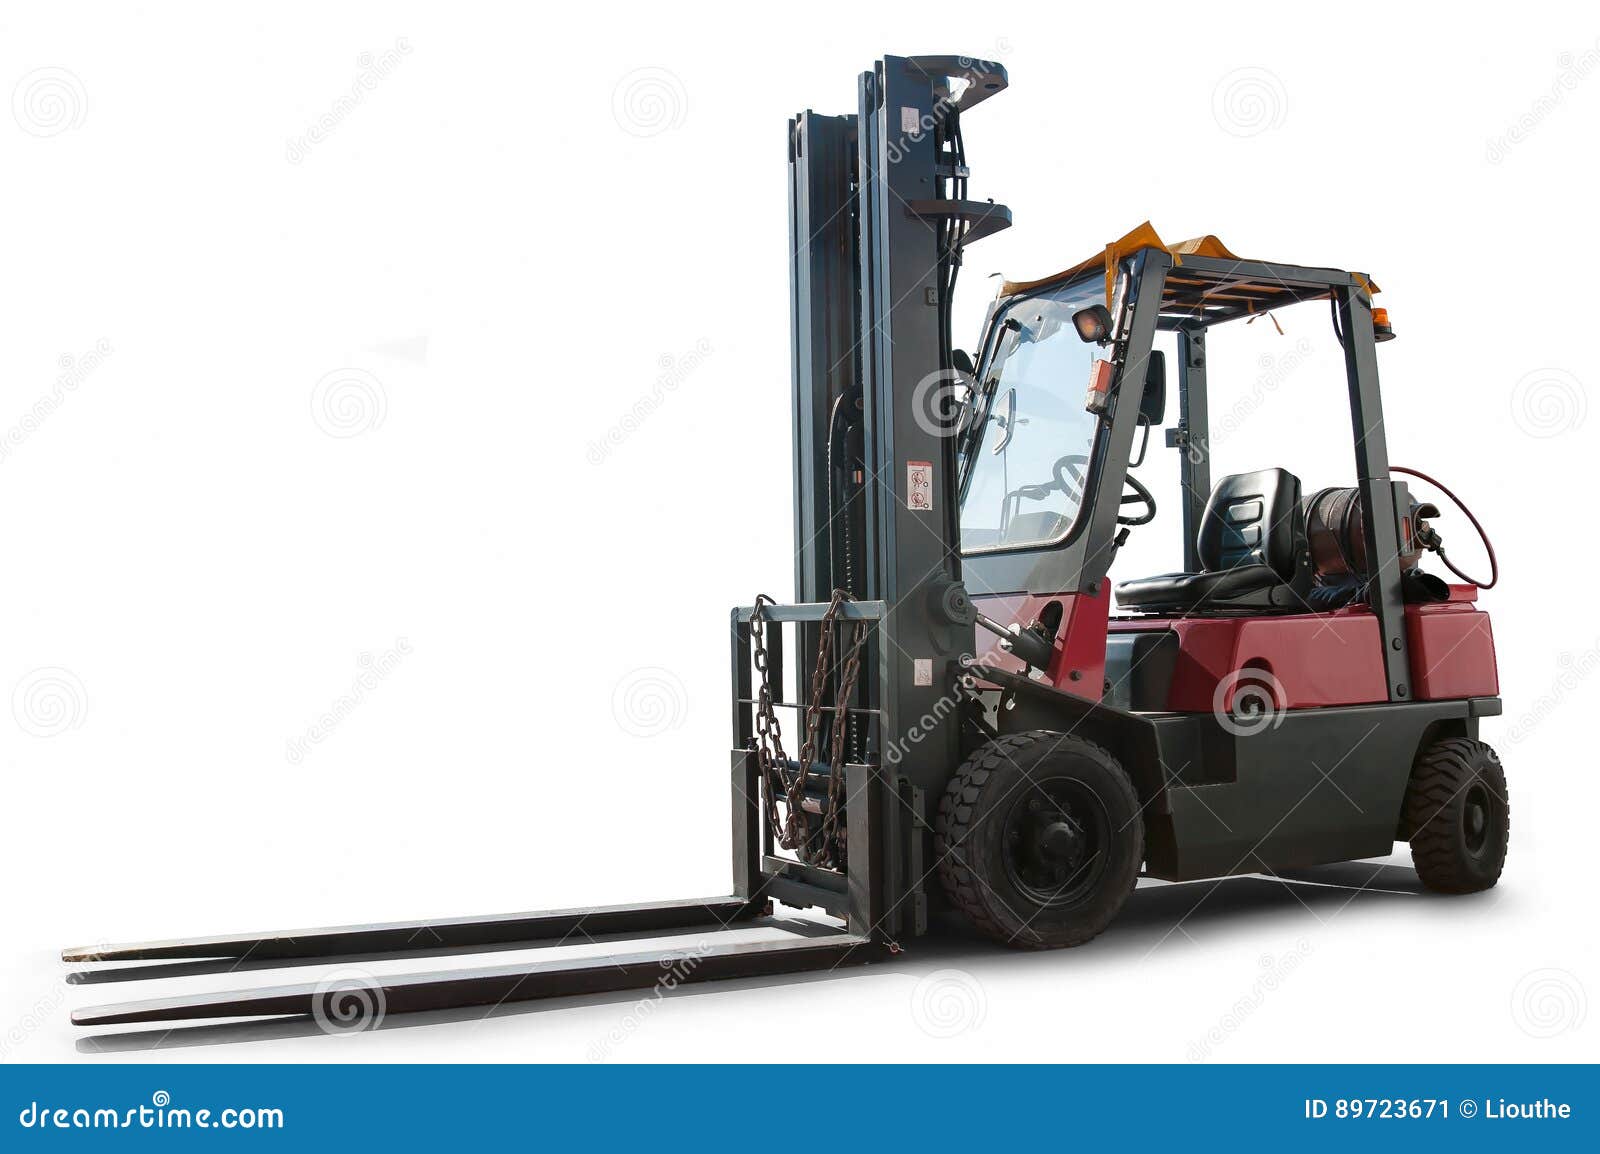 17 667 Forklift Photos Free Royalty Free Stock Photos From Dreamstime